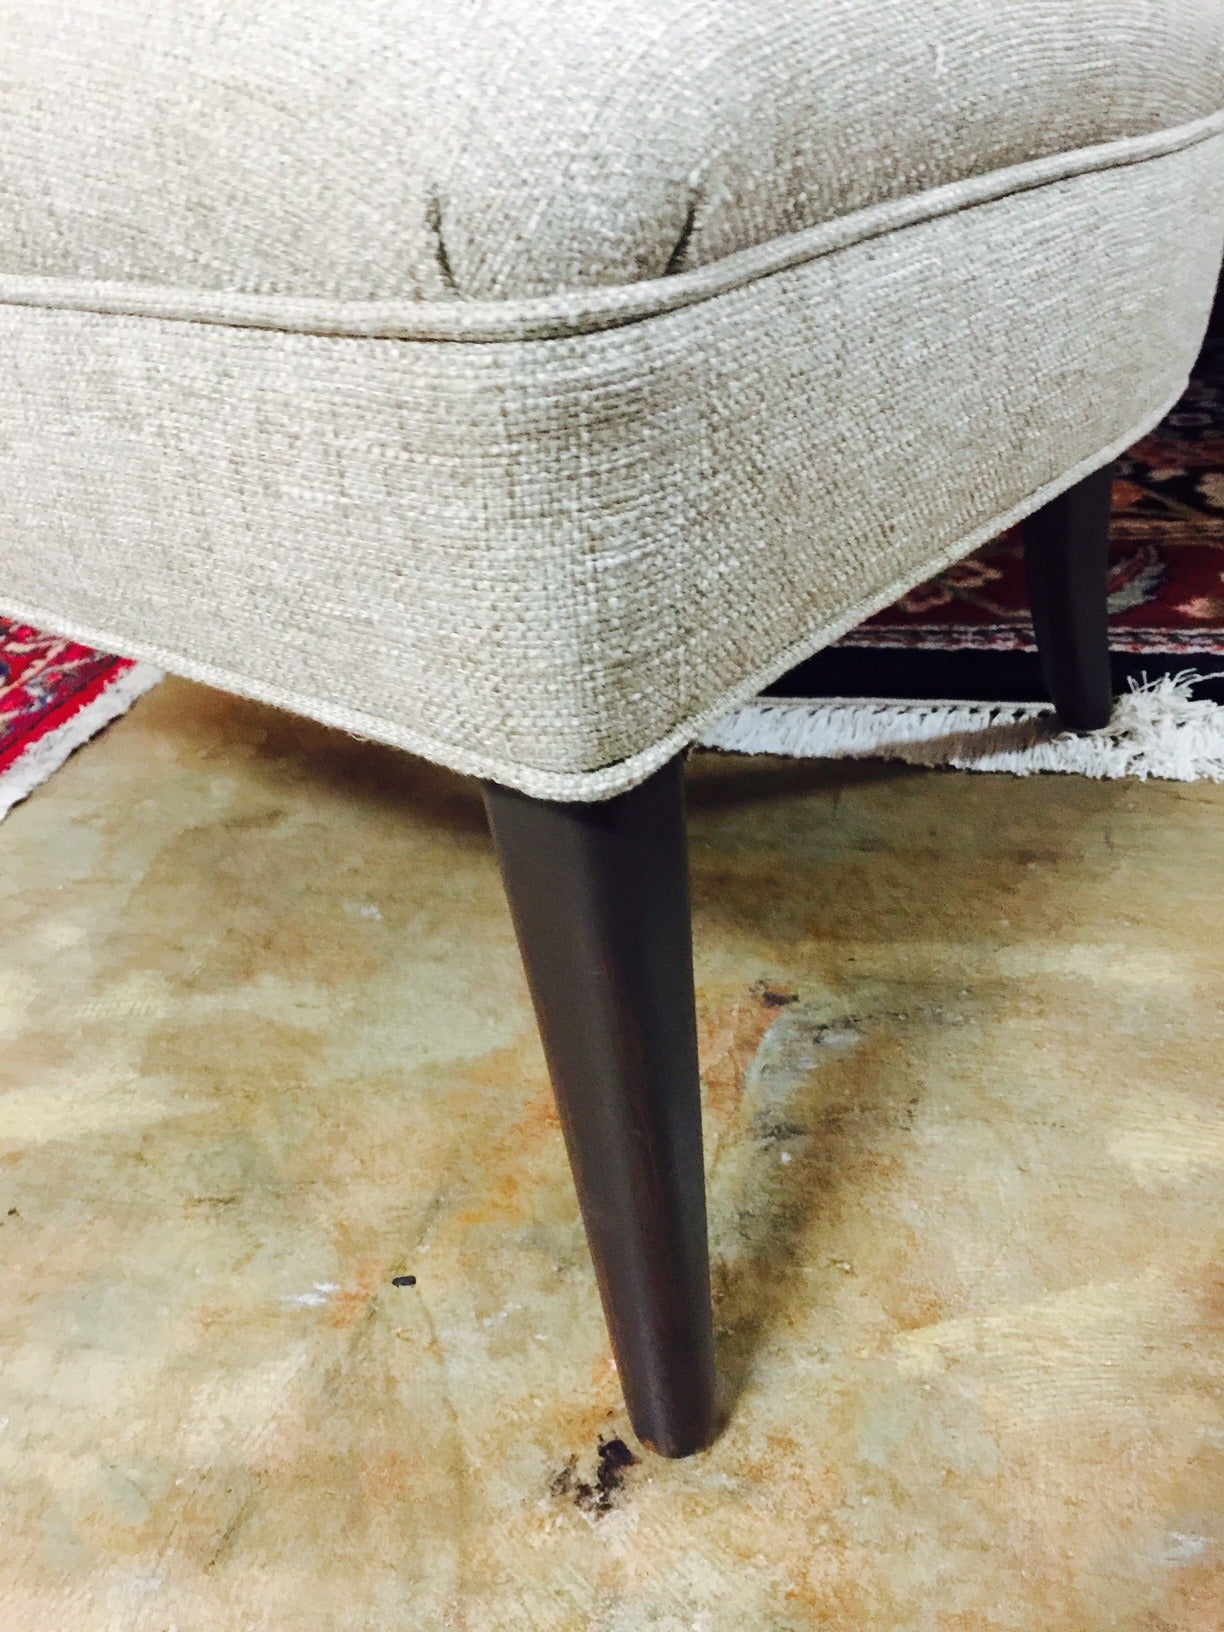 This vintage chair has been completely refurbished, and is reupholstered in a slighly nubby oatmeal colored fabric (see close up).   It has a sweet shape to the back and is petite enough to fit in any small space as an extra chair or in a bedroom.